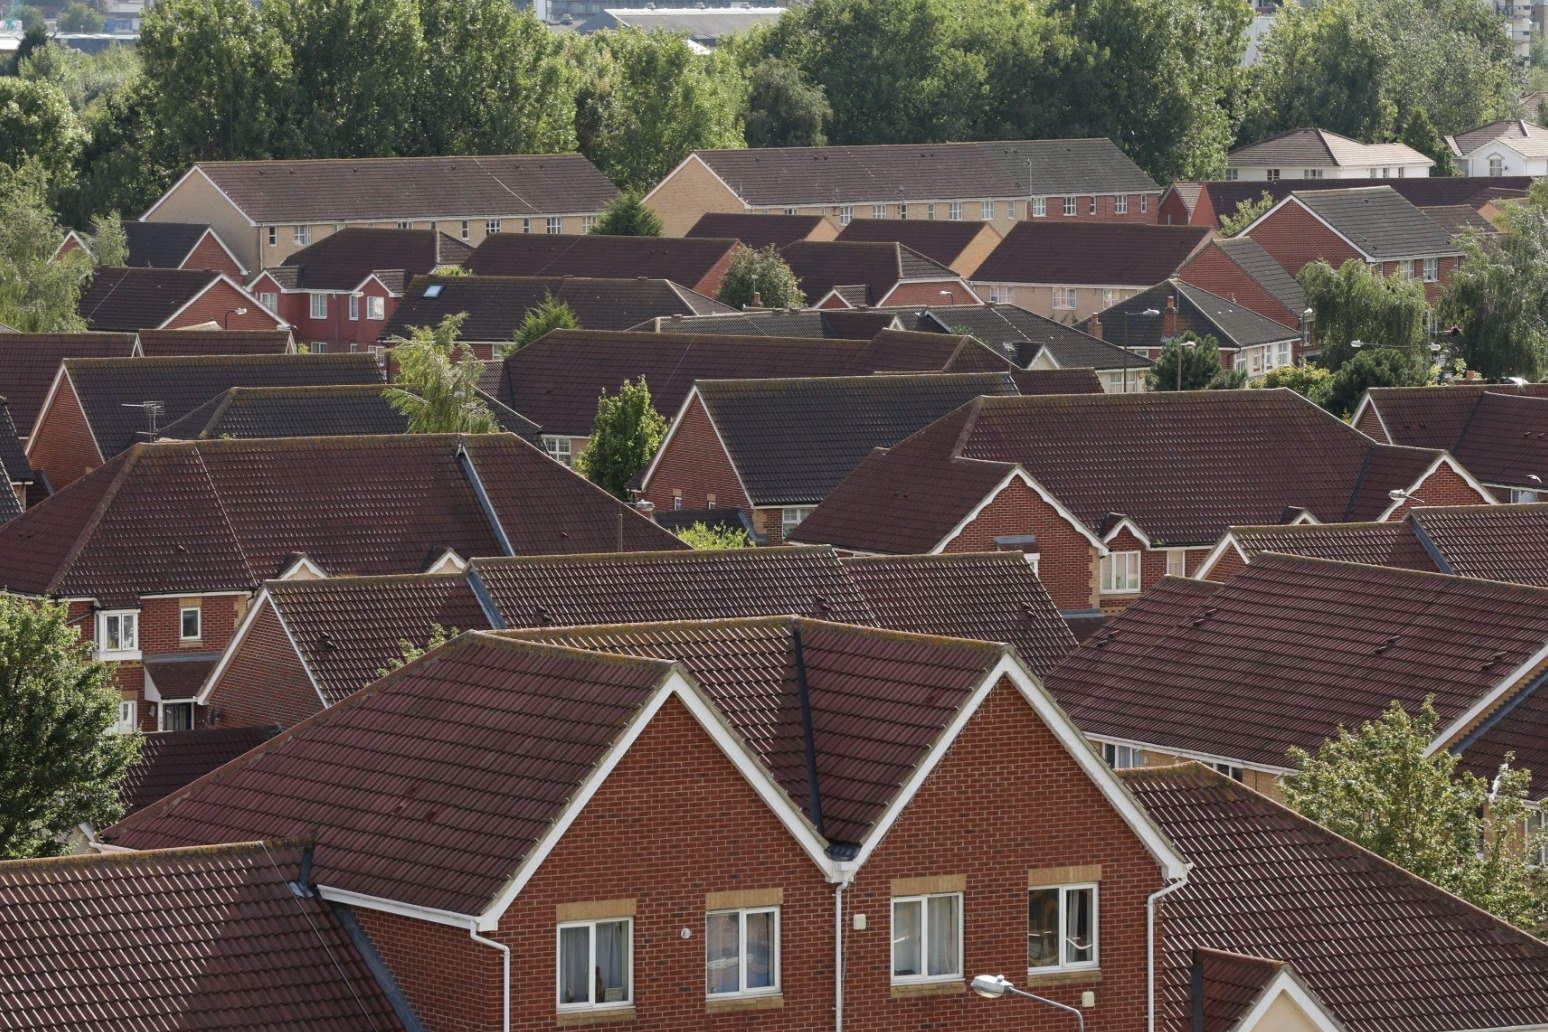 House price anxiety drags down consumer confidence – survey 